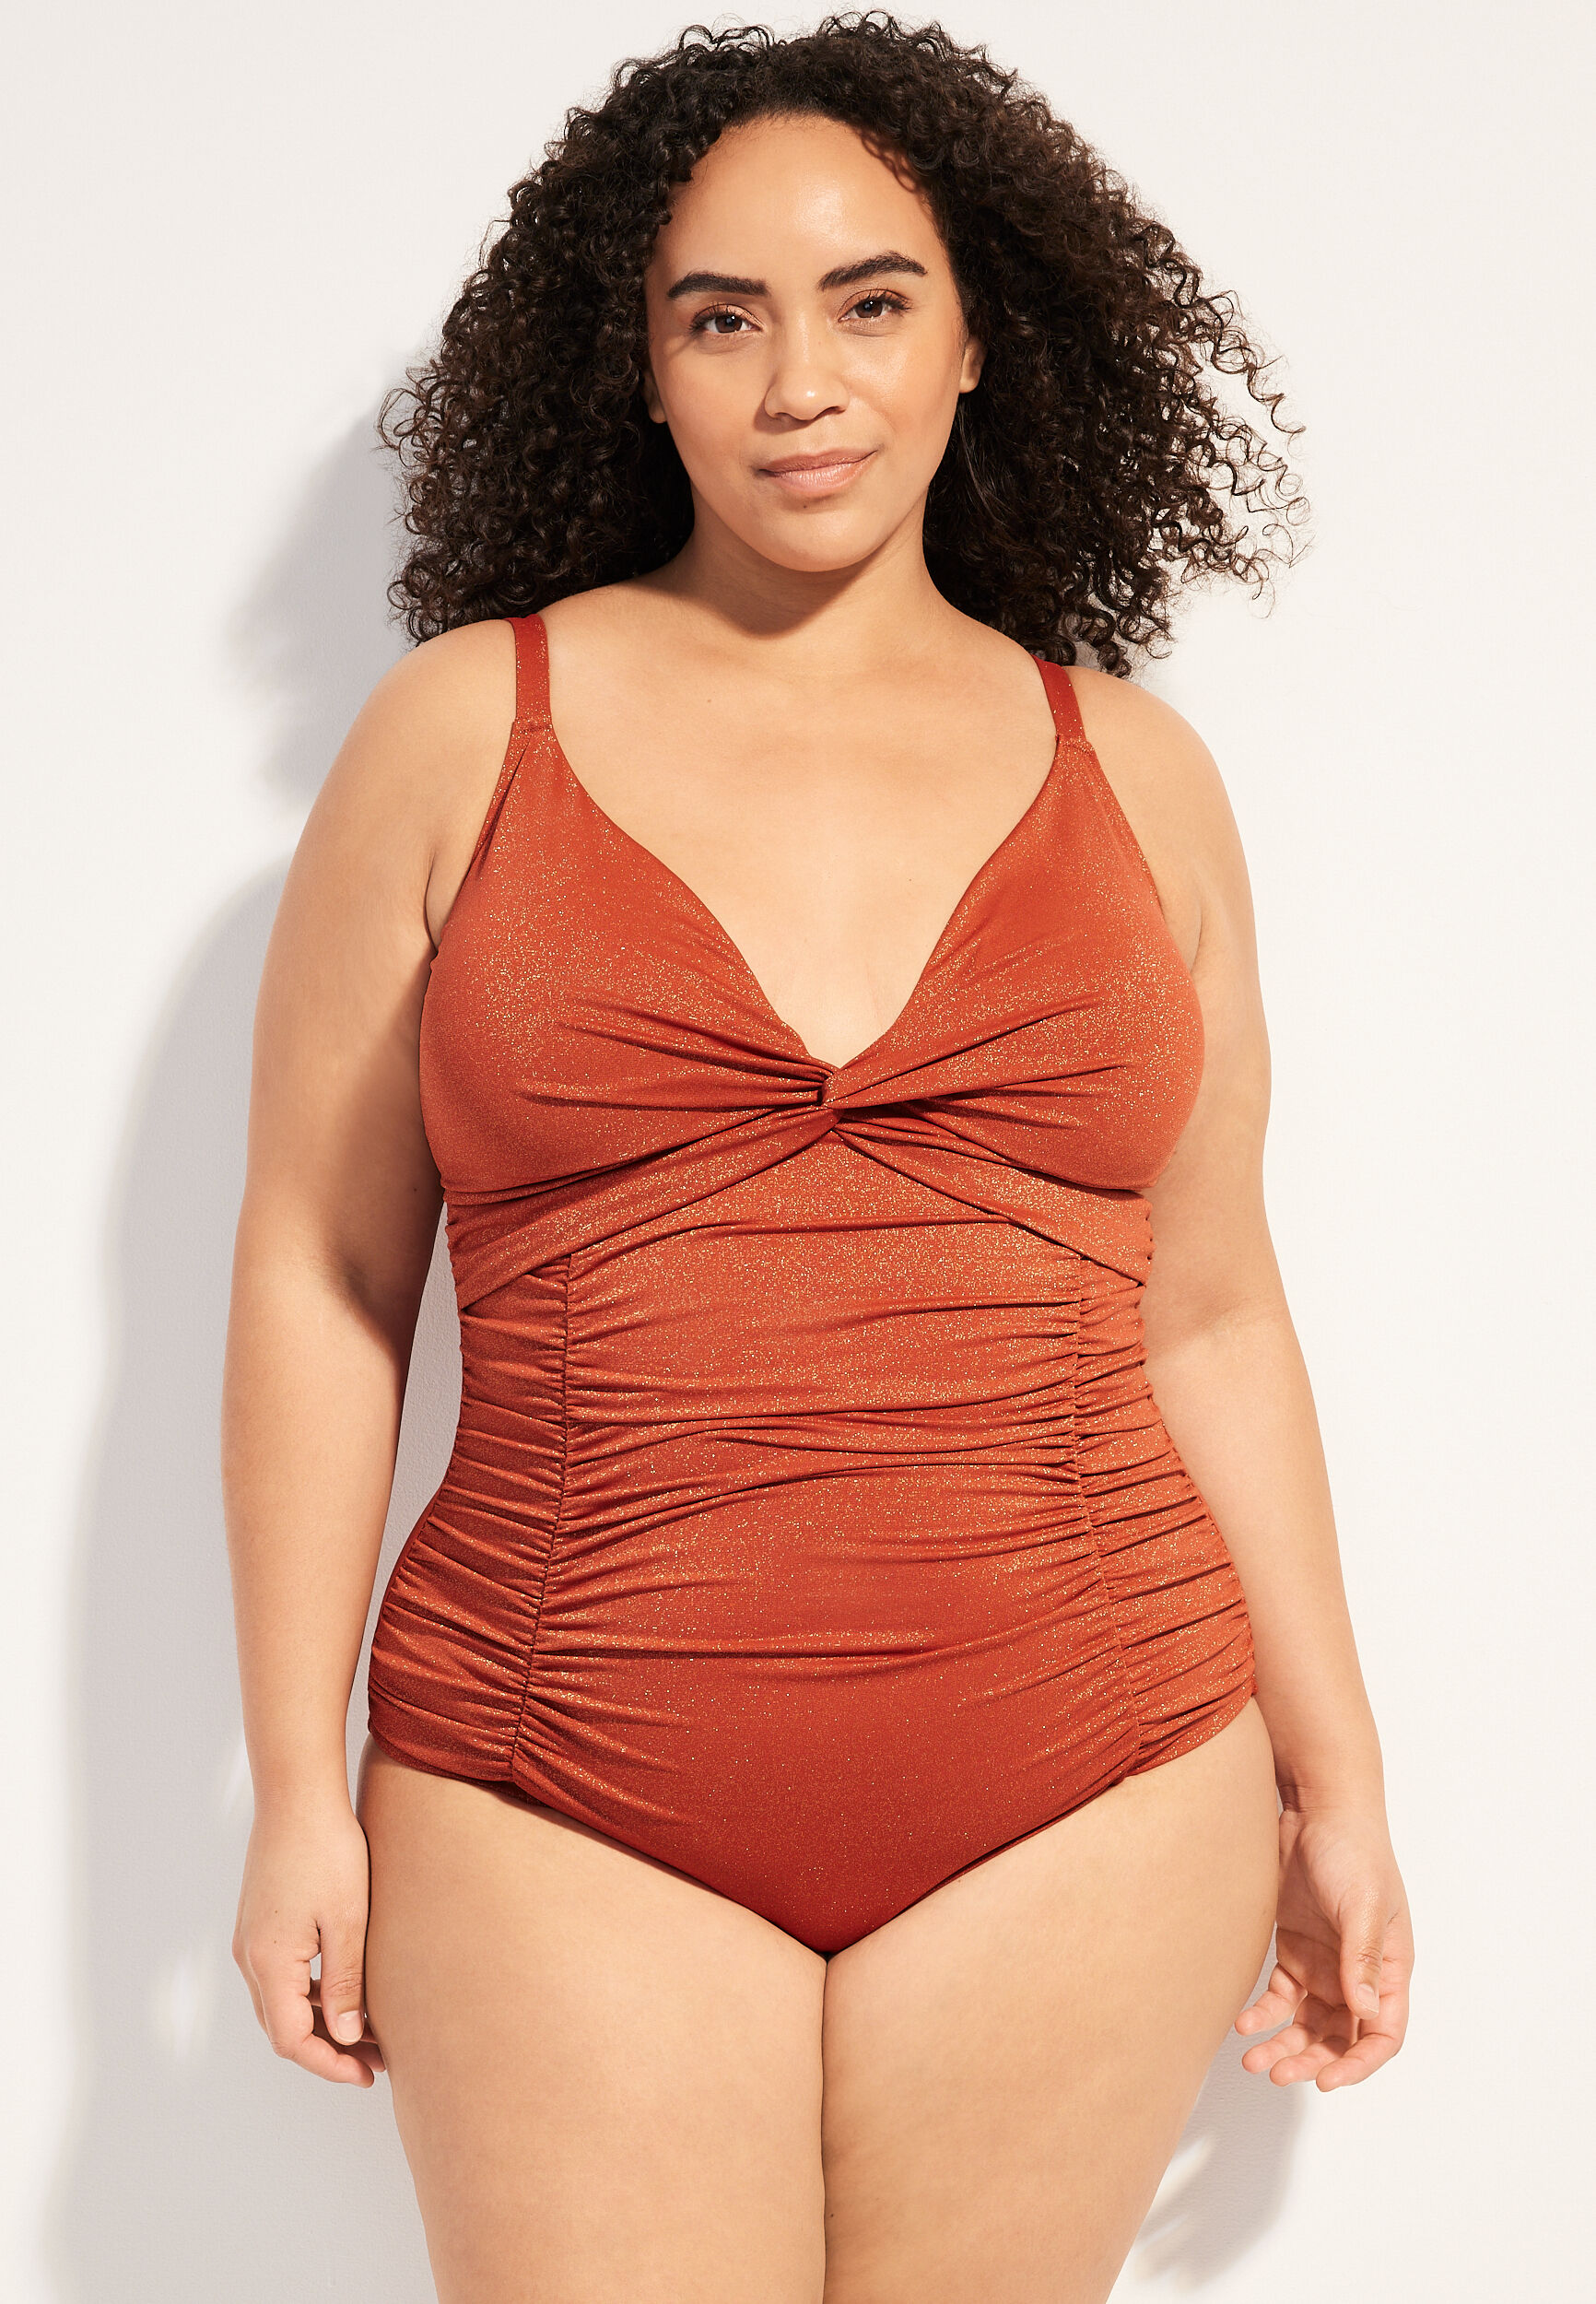 Maurices Plus Size Women's Sparkle Ruched One Piece Swimsuit Orange Size 2X - 2X